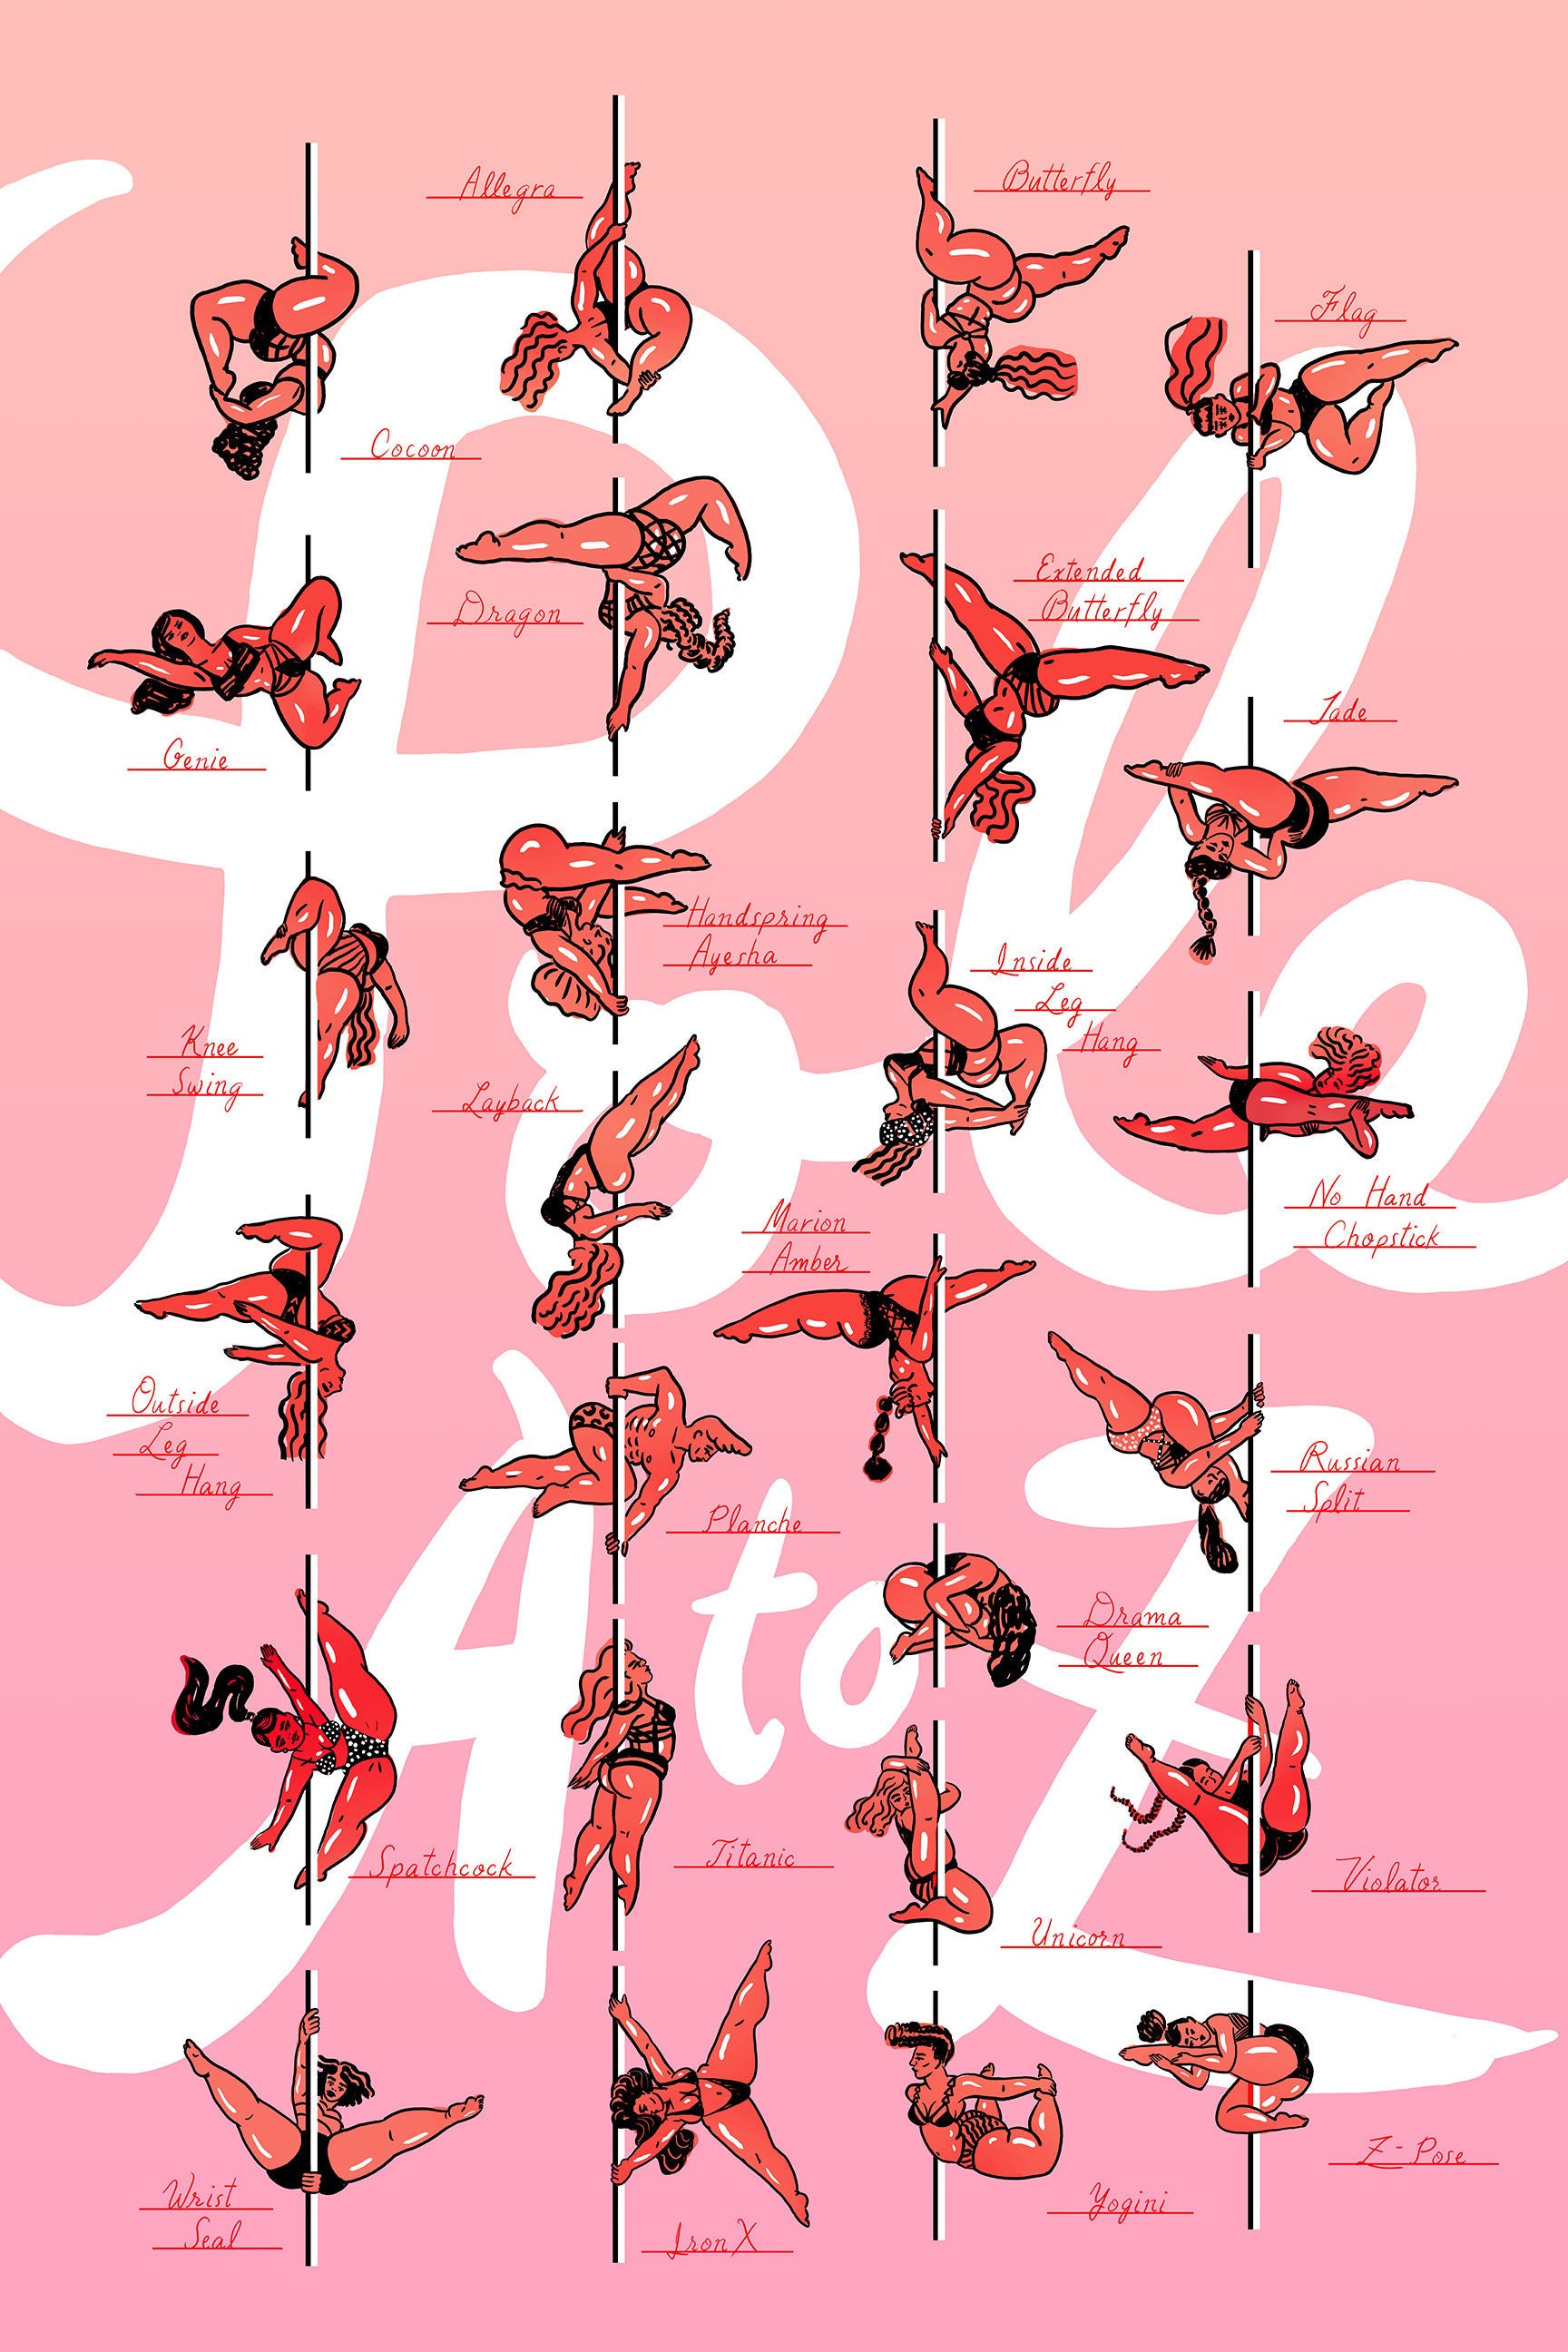 Pole Dance Moves Poster A to Z 